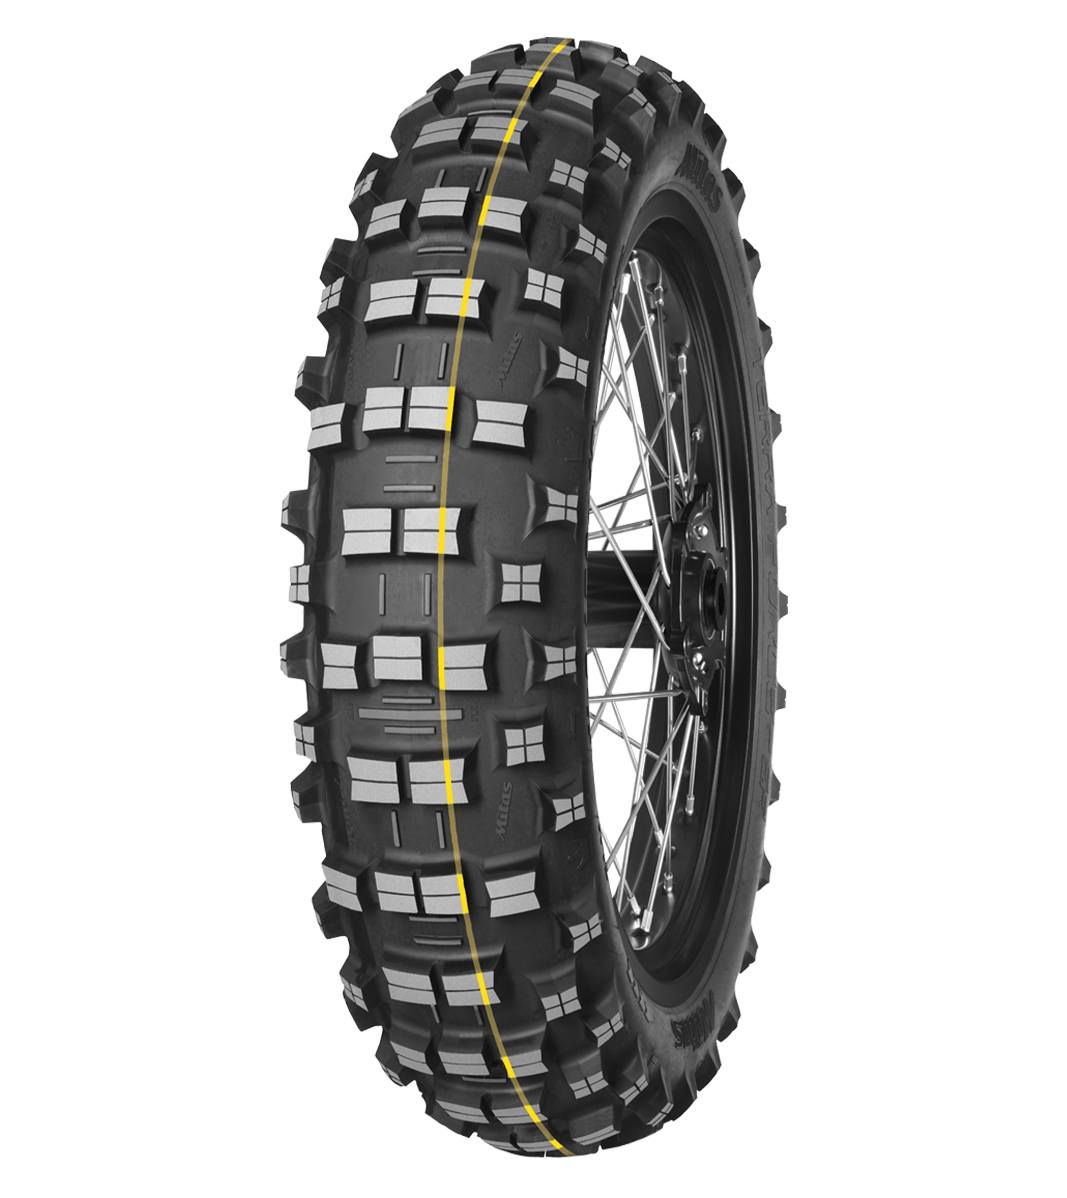 Mitas TERRA FORCE-EF 140/80-18 Enduro Competition Off-Road SUPER 70R Yellow Tube Rear Tire, 226283, 140/80-18, Enduro Competition, Off-Road, Rear, Terra Force, Terra Force-EF, Trail, Tires - Imported and distributed in North &amp; South America by Lindeco Genuine Powersports - Premier Powersports Equipment and Accessories for Motorcycle Enthusiasts, Professional Riders and Dealers.